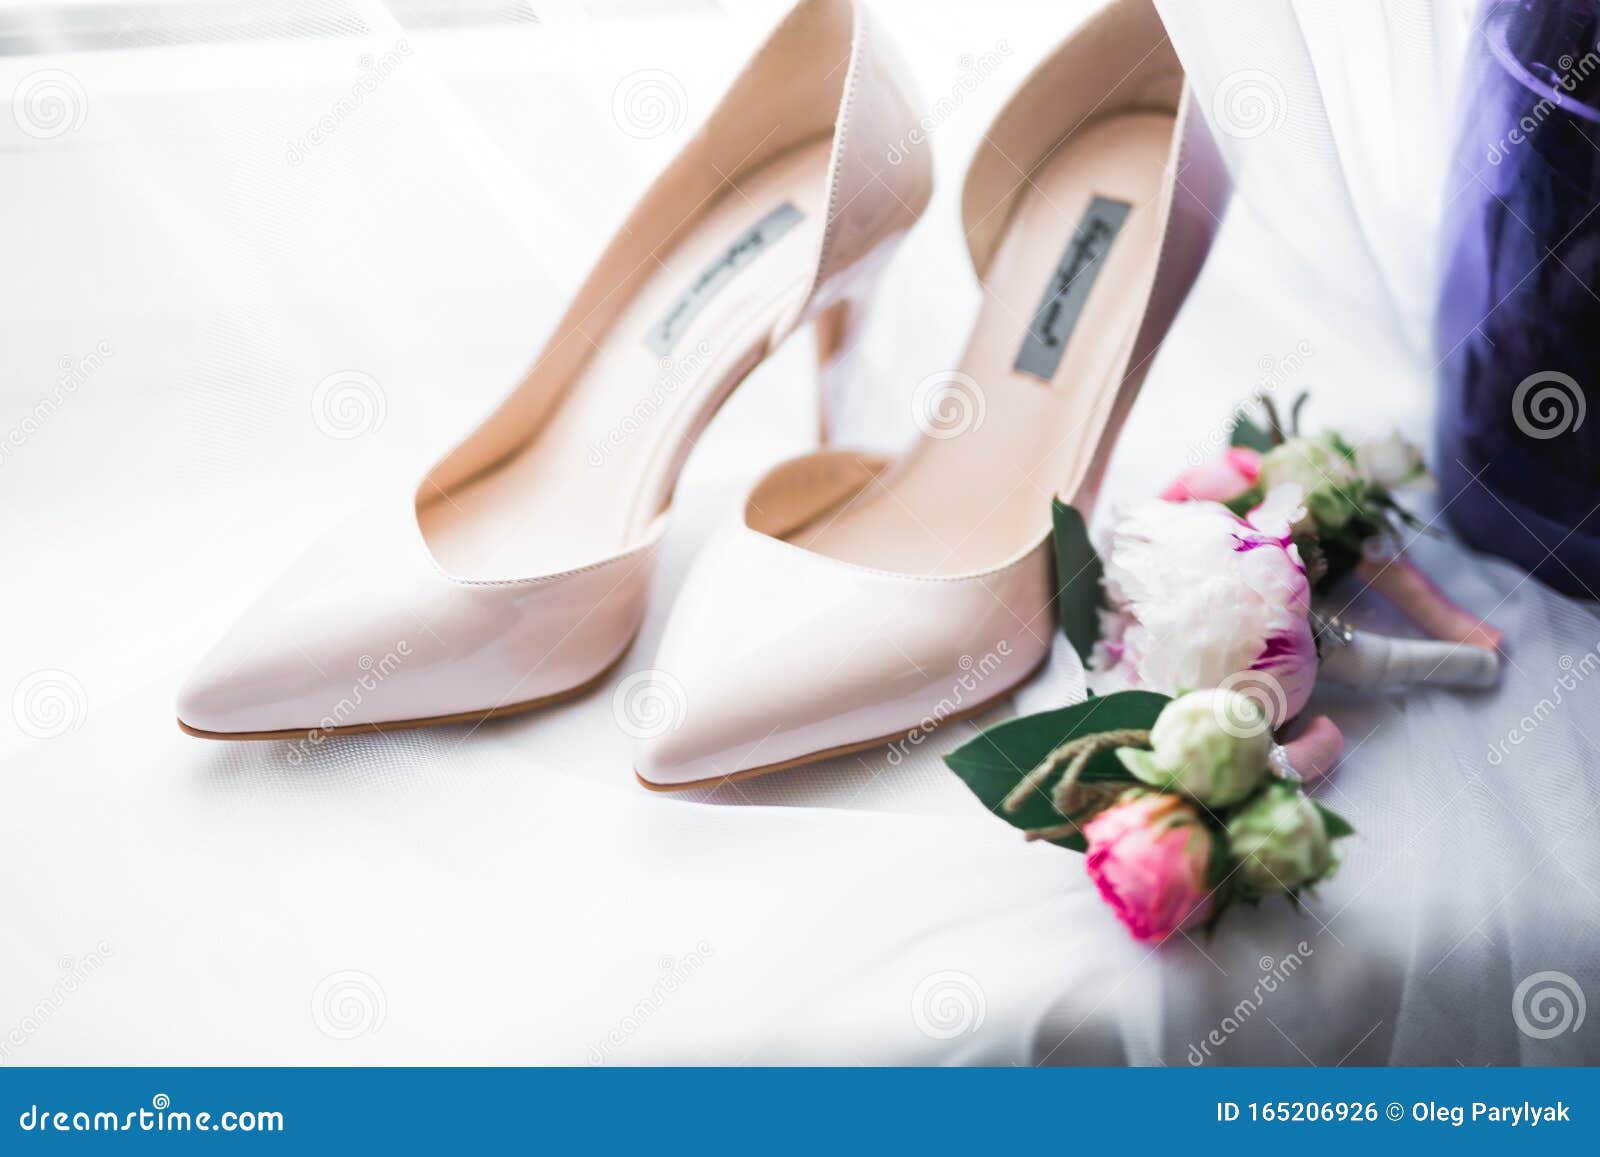 Pair of Elegant and Stylish Bridal Shoes with a Bouquet with Roses and ...